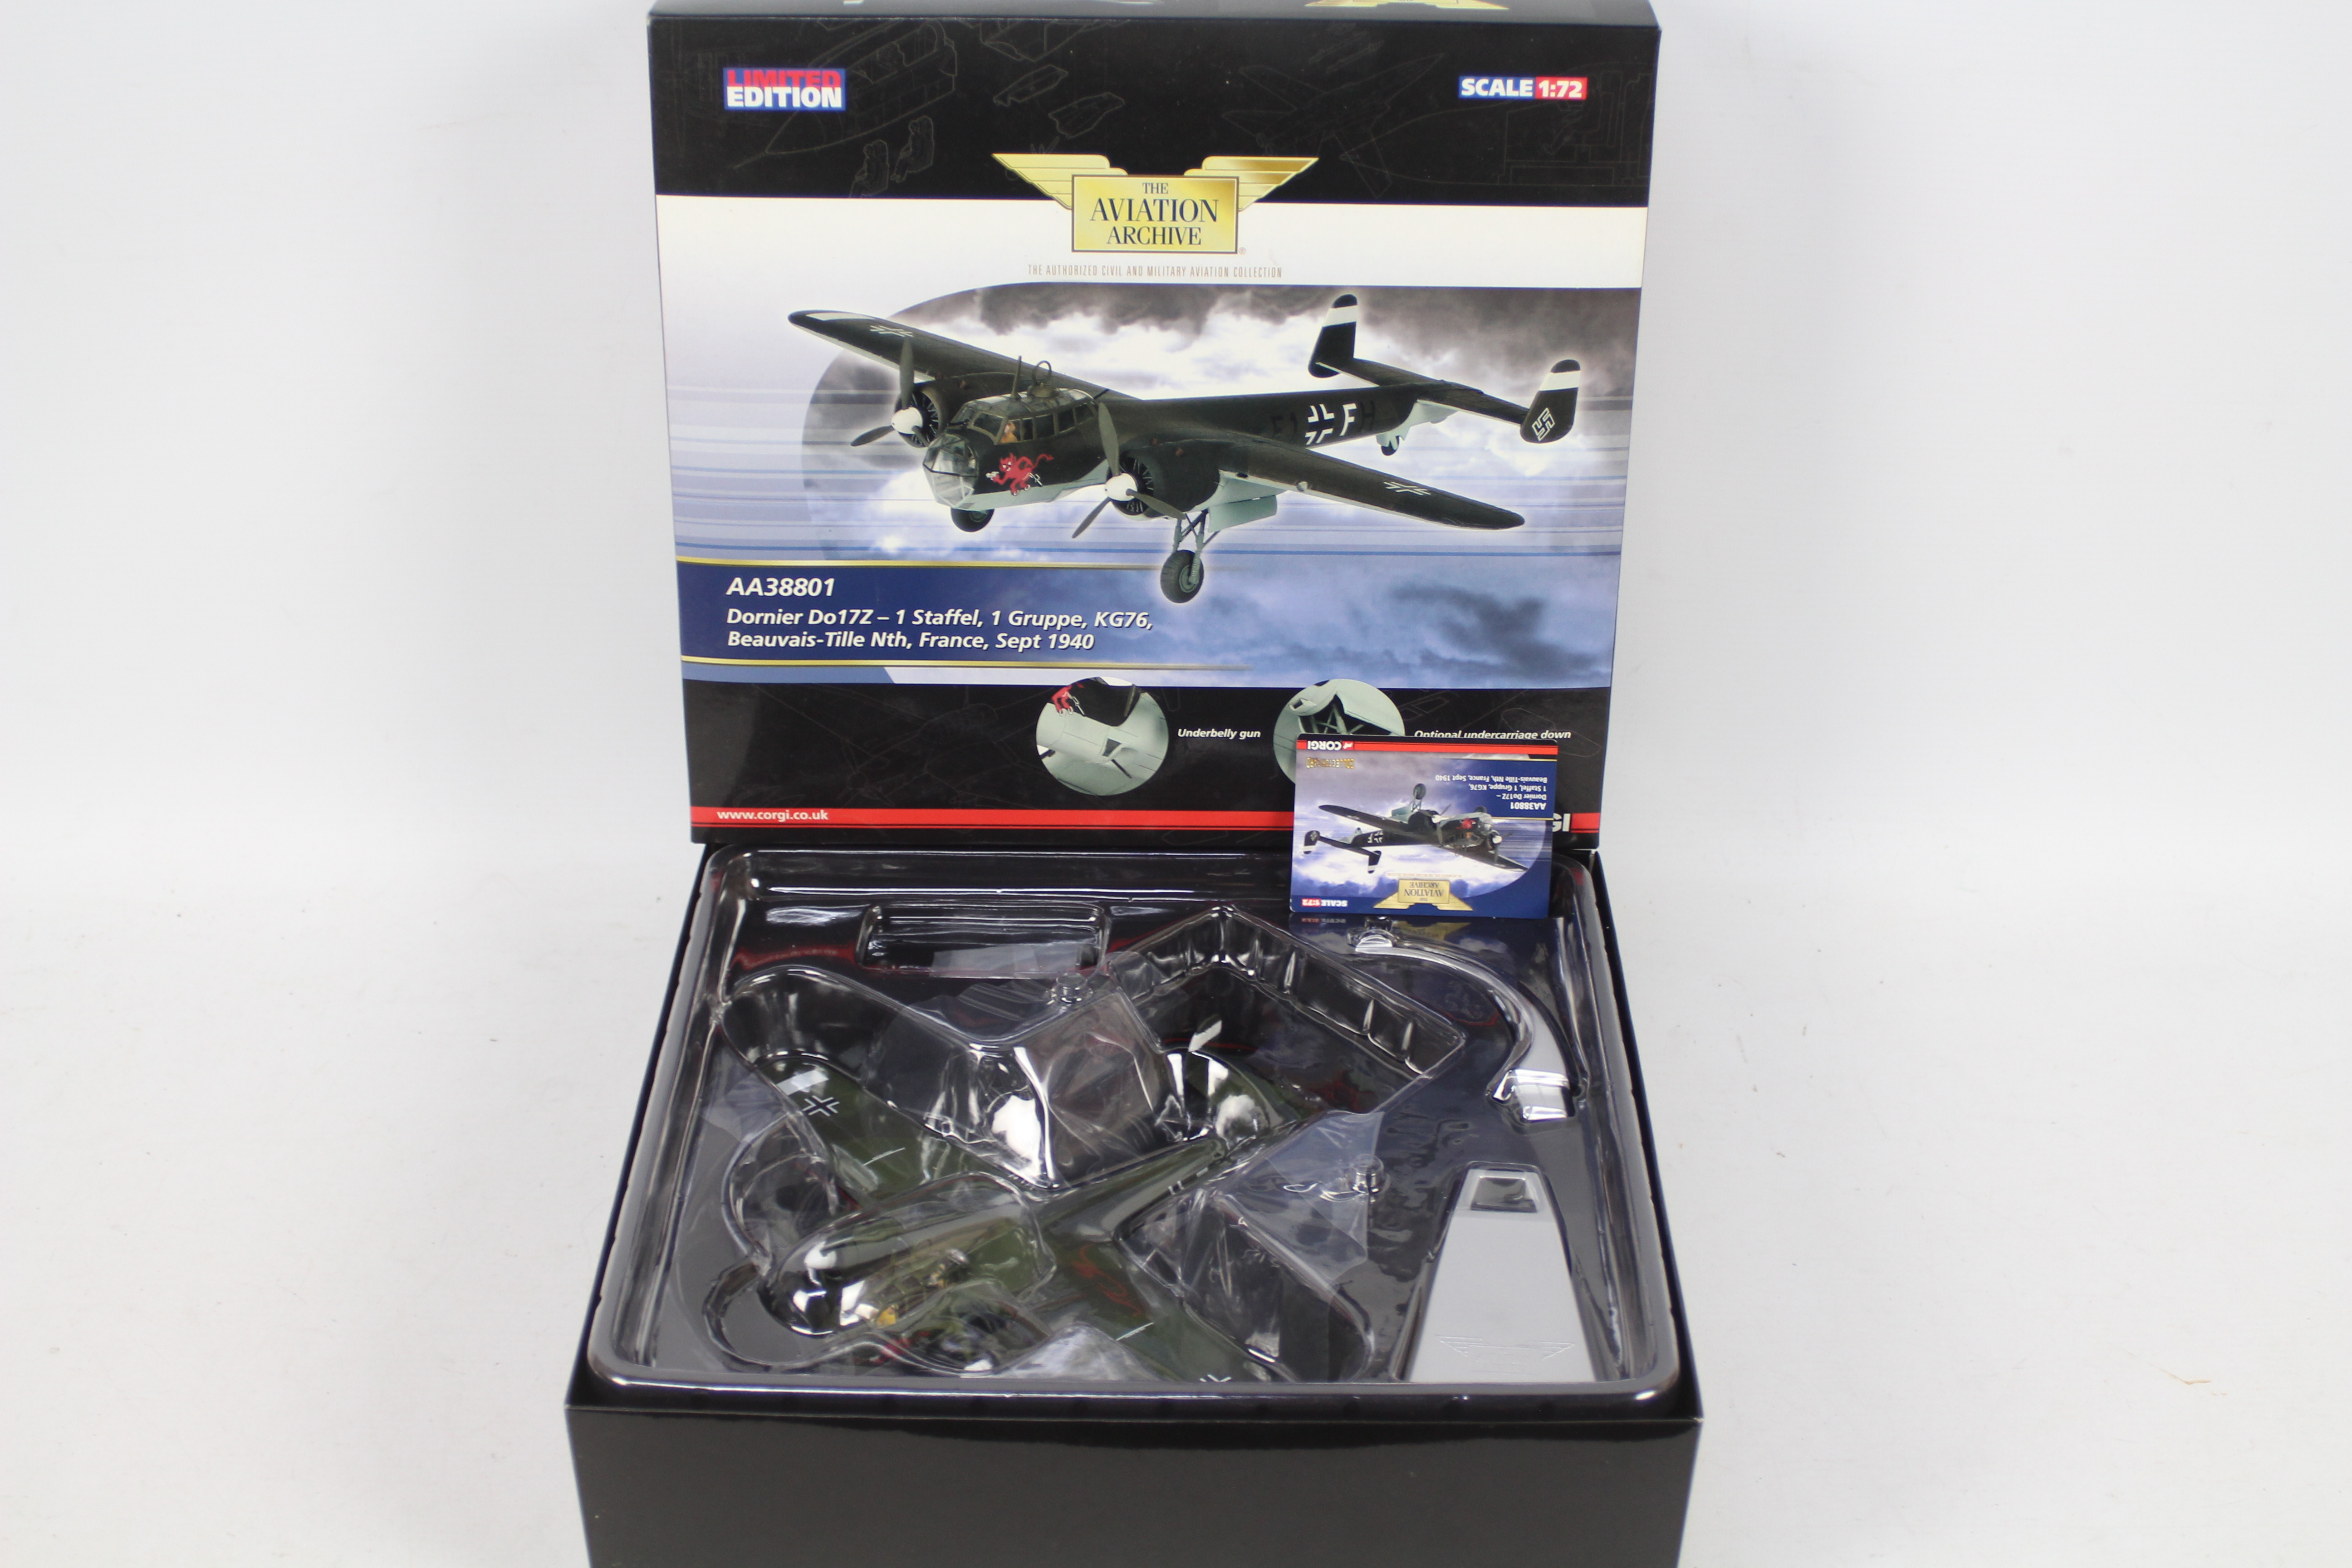 Corgi Aviation Archive - A boxed Corgi Aviation Archive Limited Edition 1:72 scale AA38801 diecast - Image 3 of 4